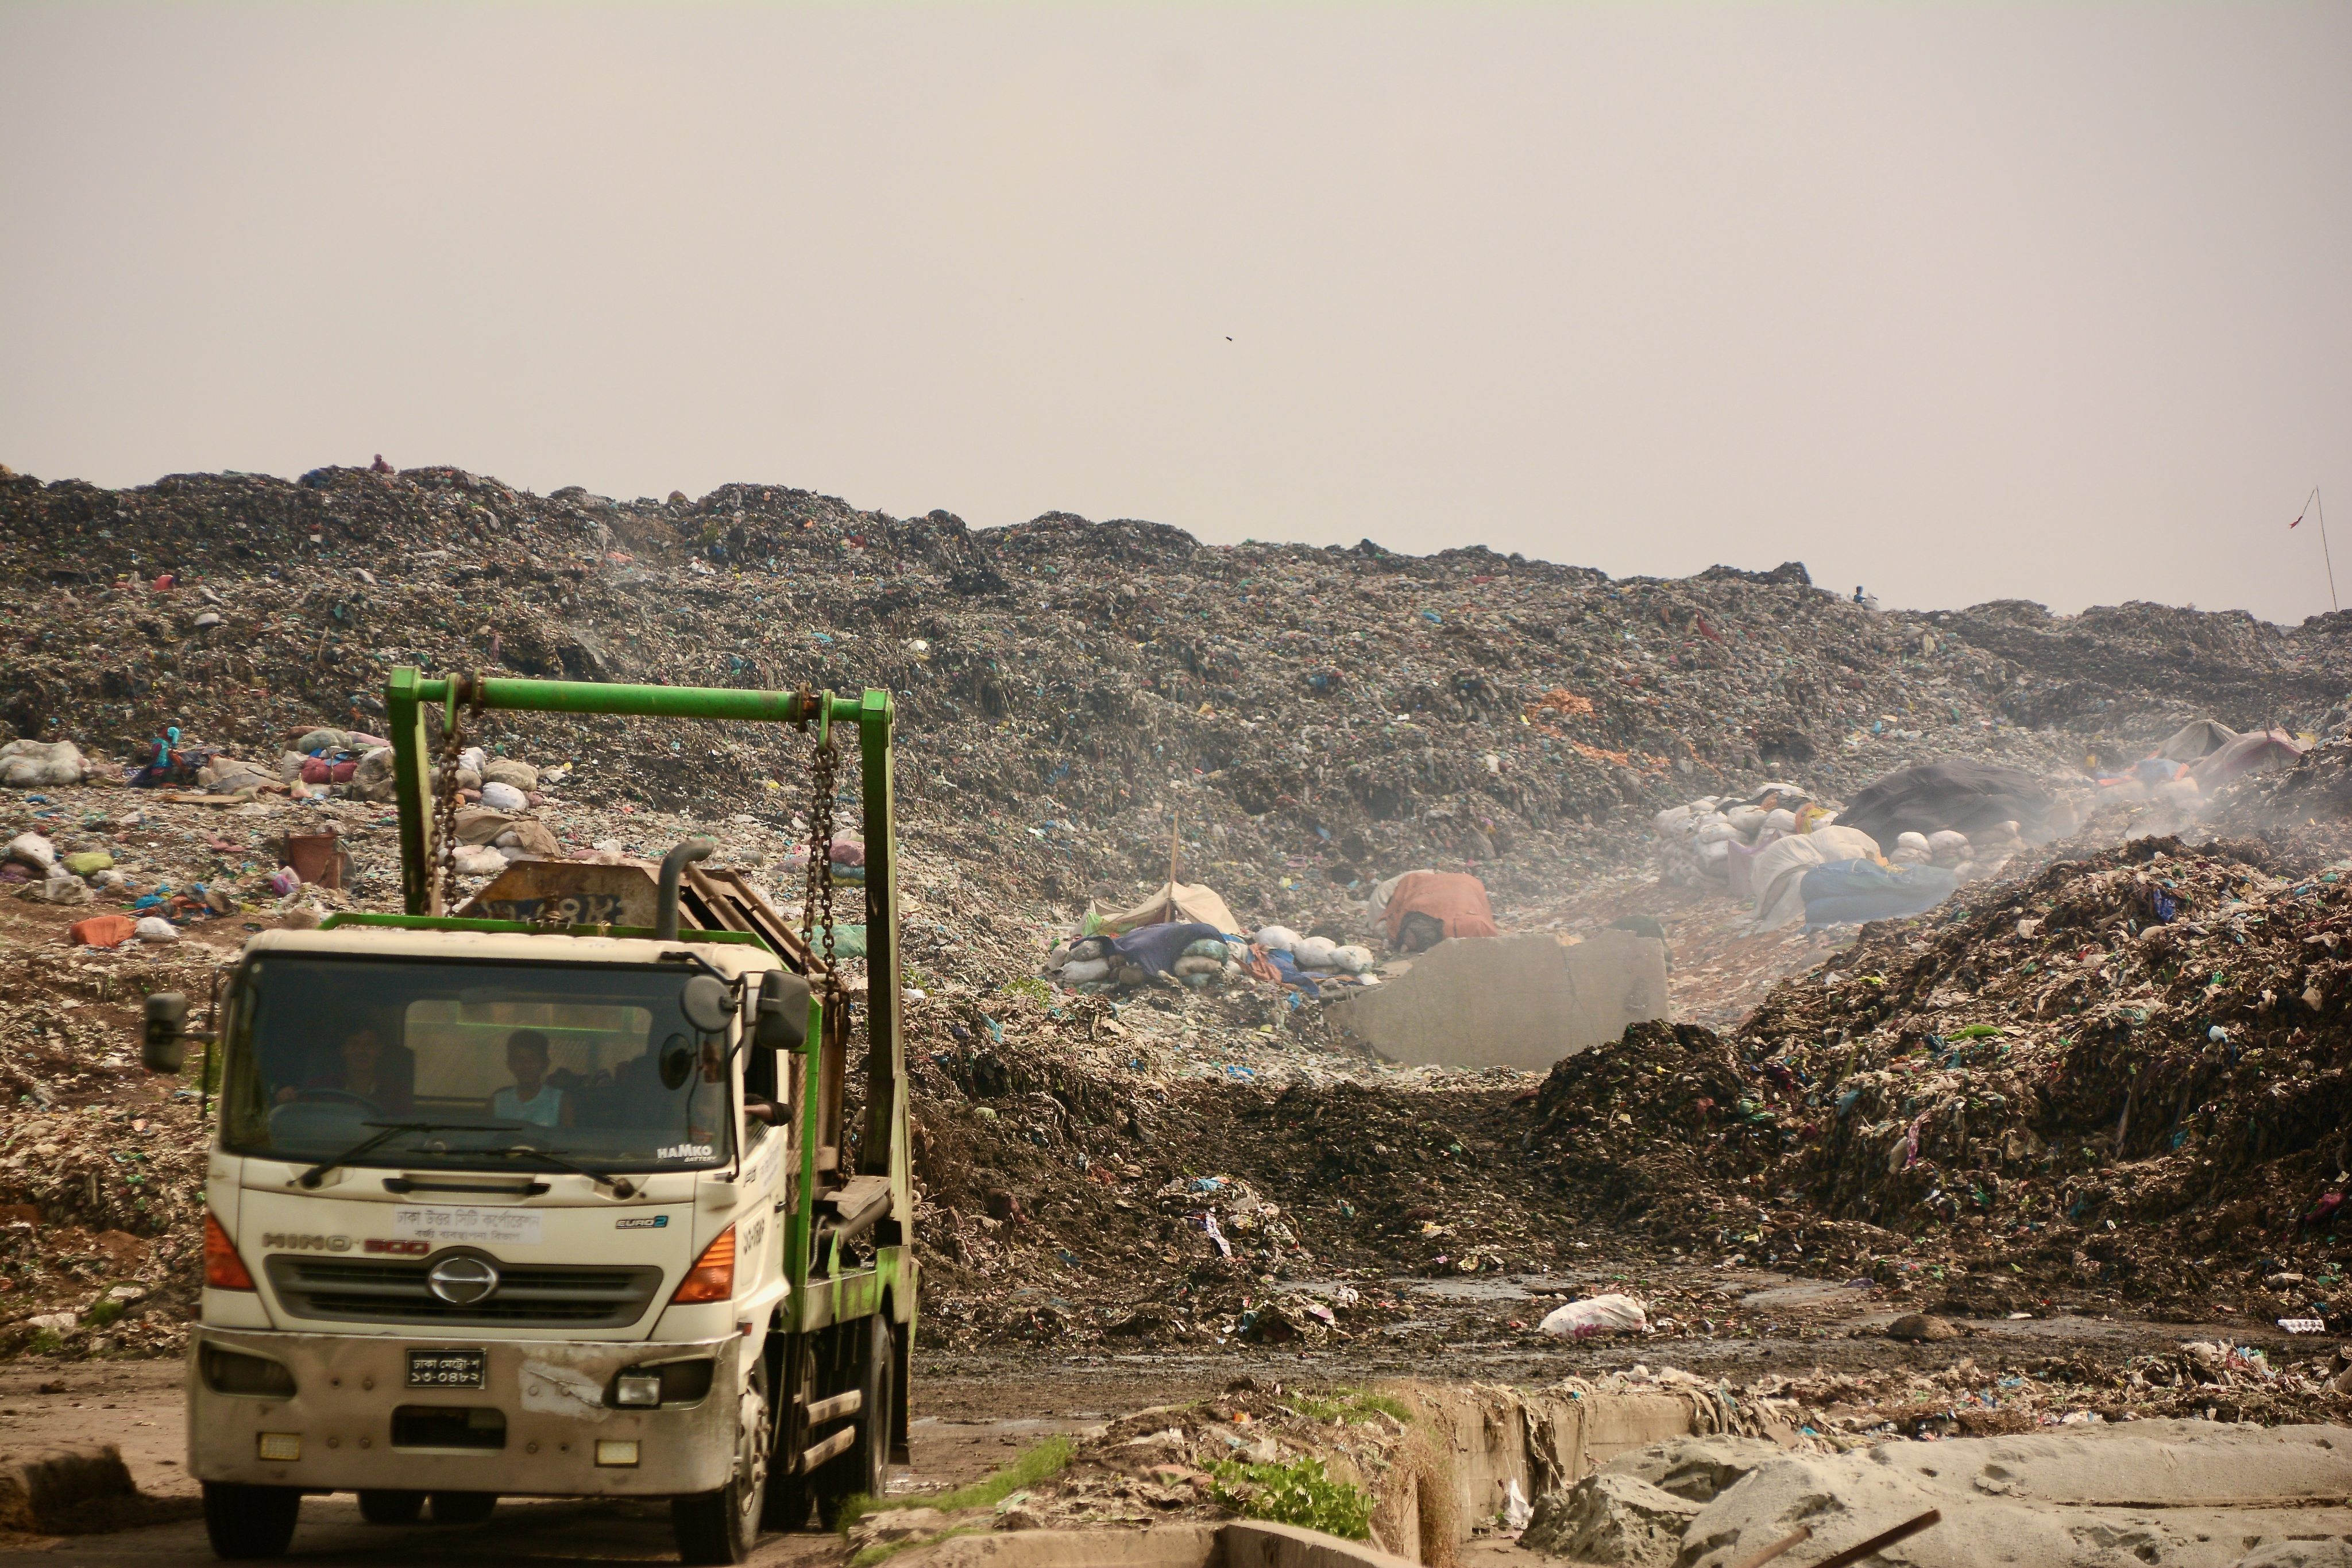 A trash truck leaves the Aminbazar landfill site on the outskirt of Dhaka. Photo: Redwan Ahmed